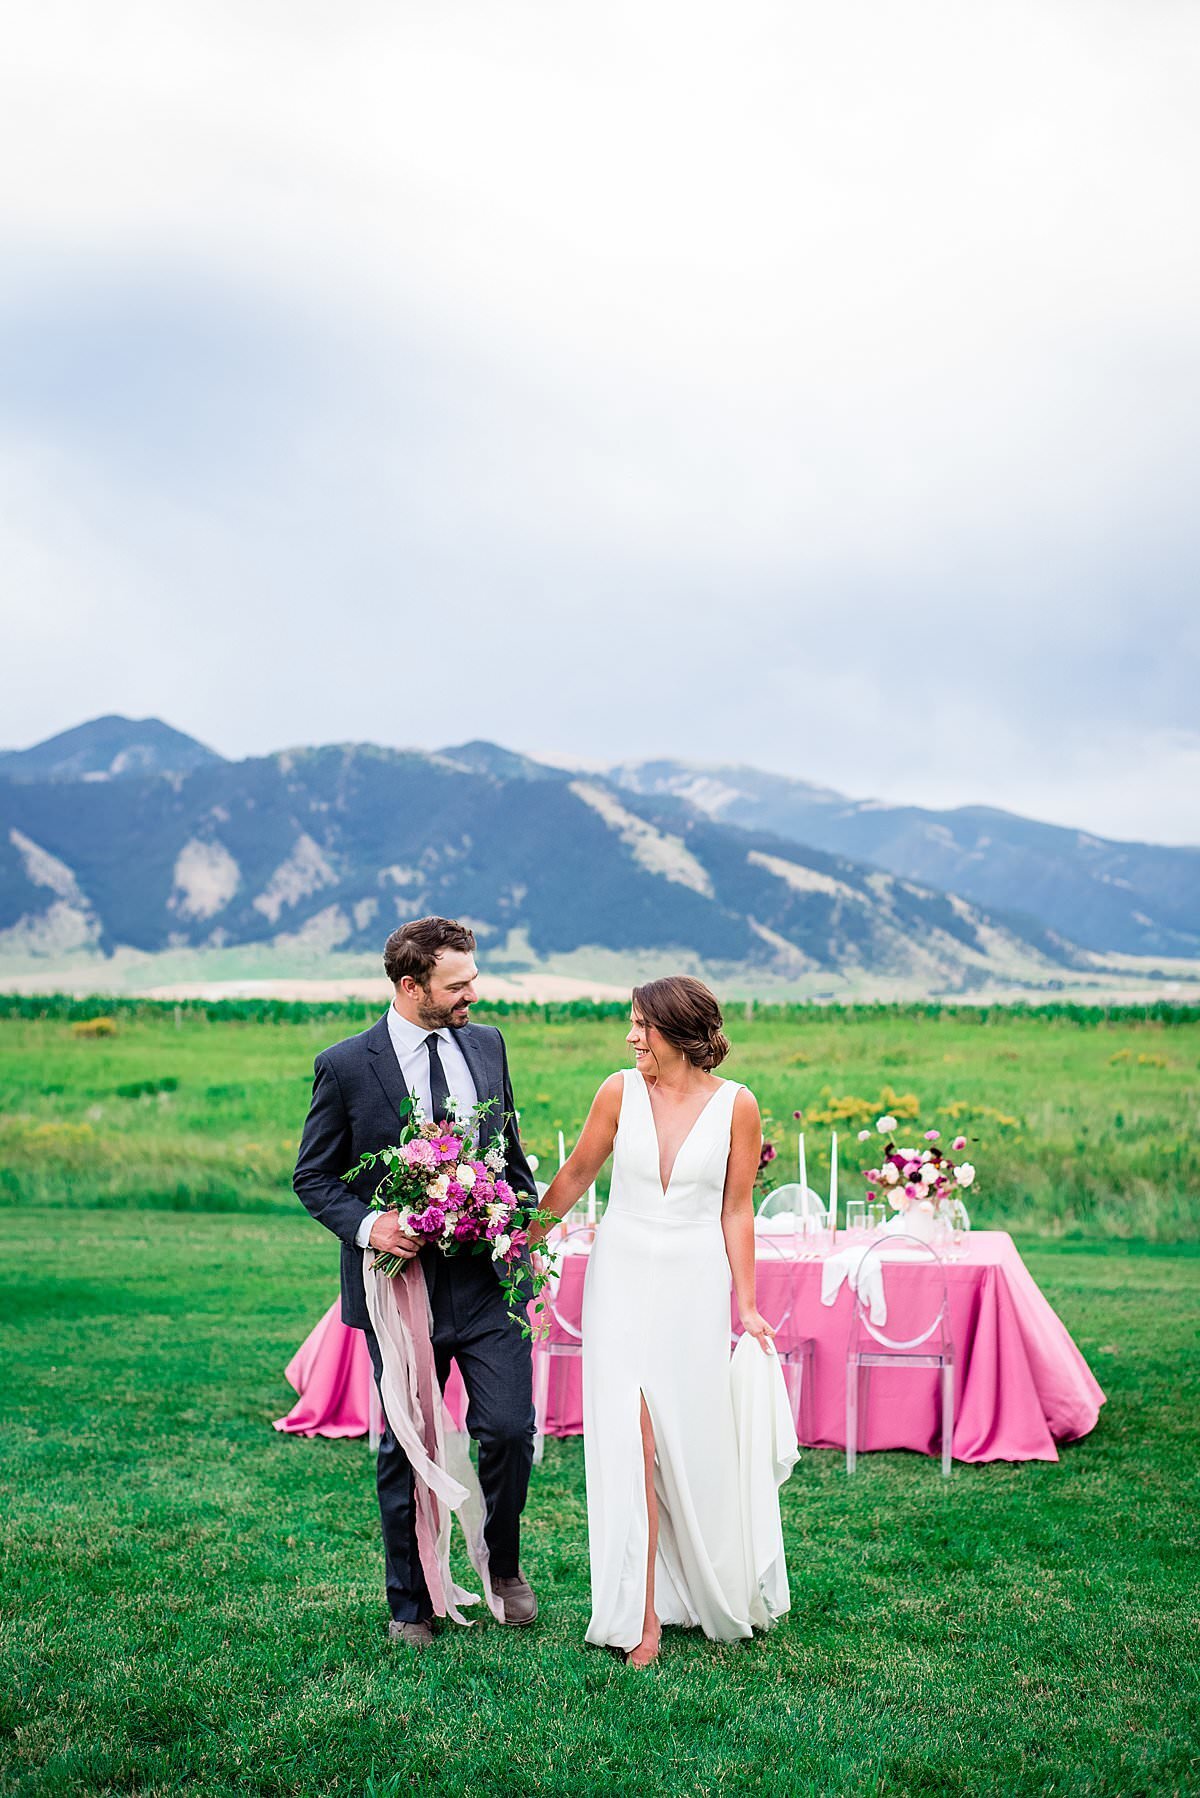 Couple standing together in vibrant green field with pink bouquet and Montana mountains in the background